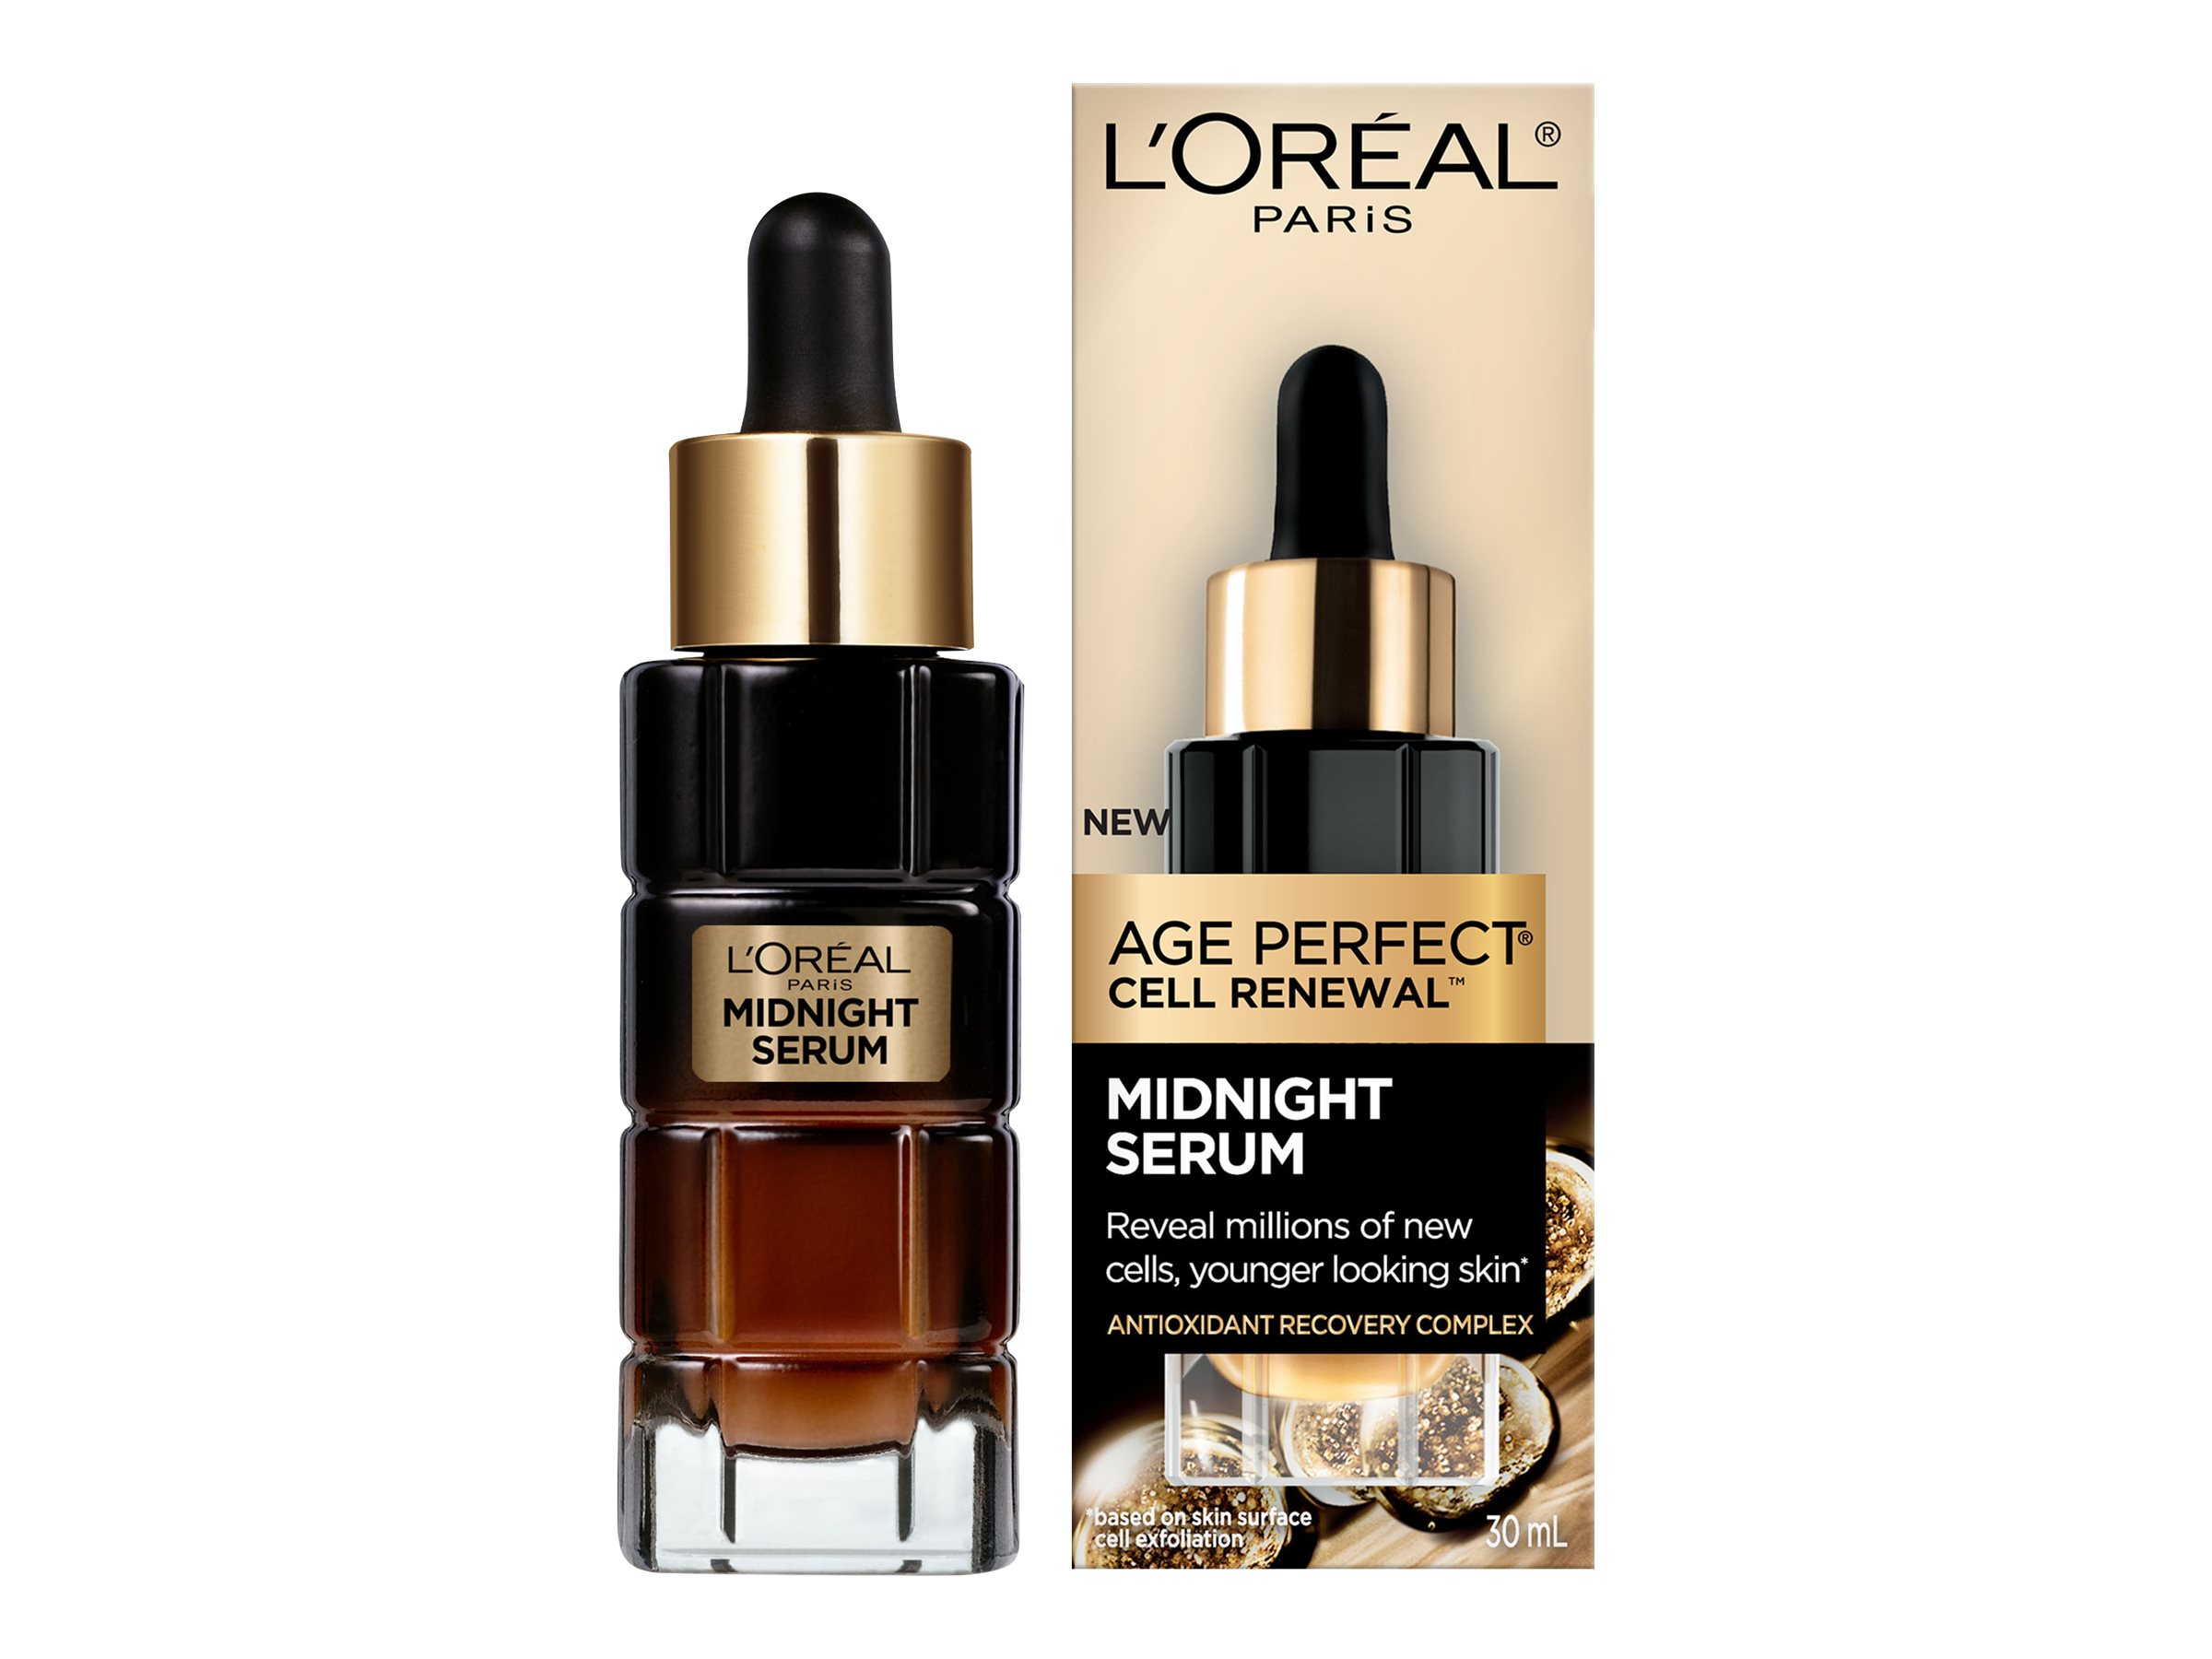 L'Oréal Paris Age Perfect Cell Renewal Midnight Serum Review